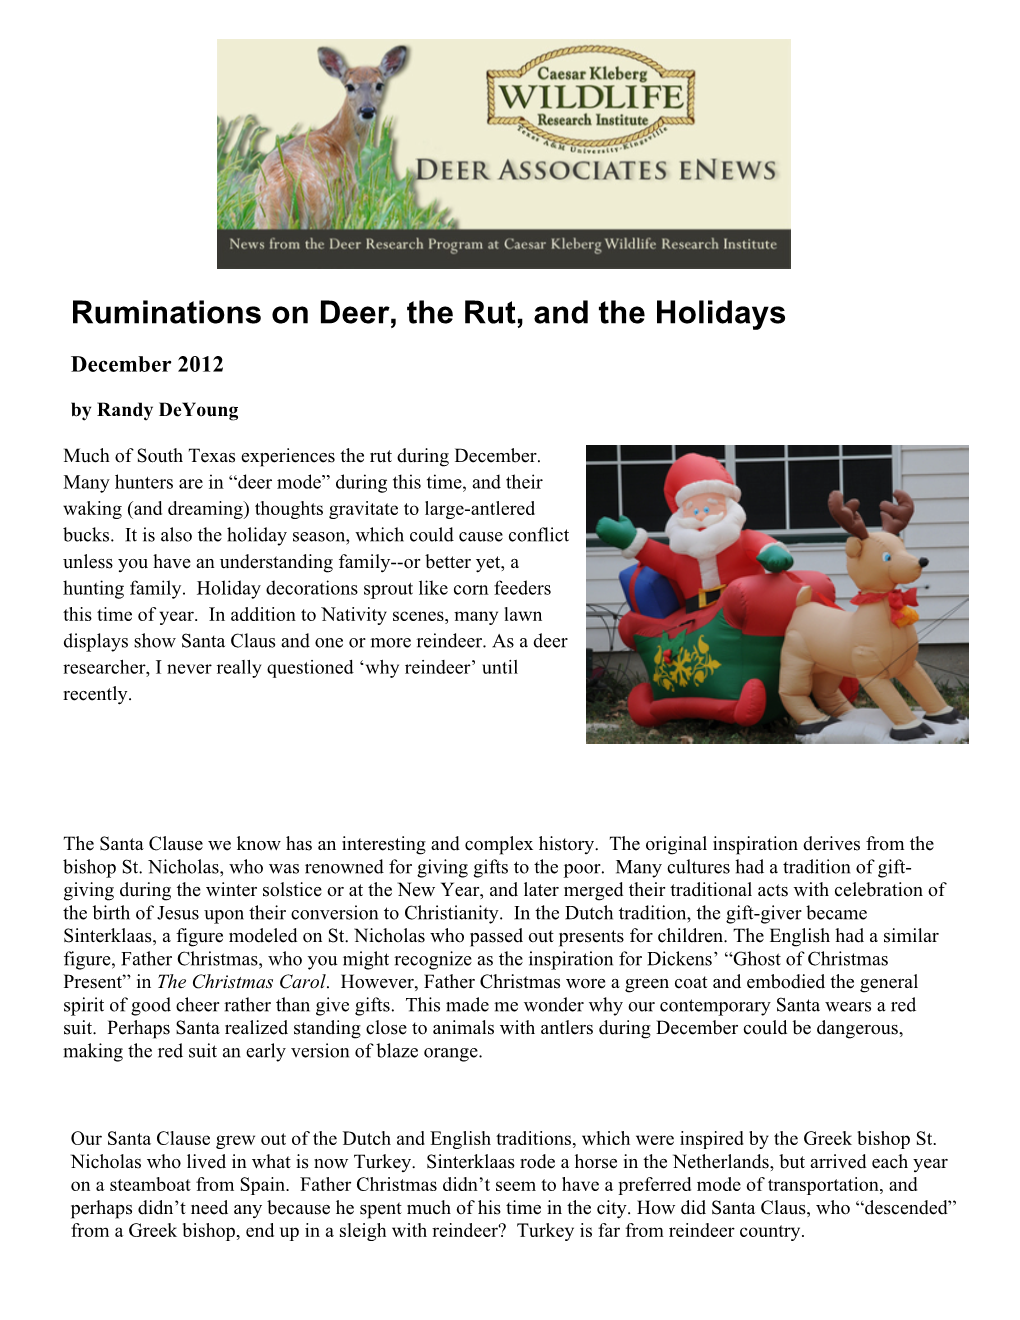 Ruminations on Deer, the Rut, and the Holidays December 2012